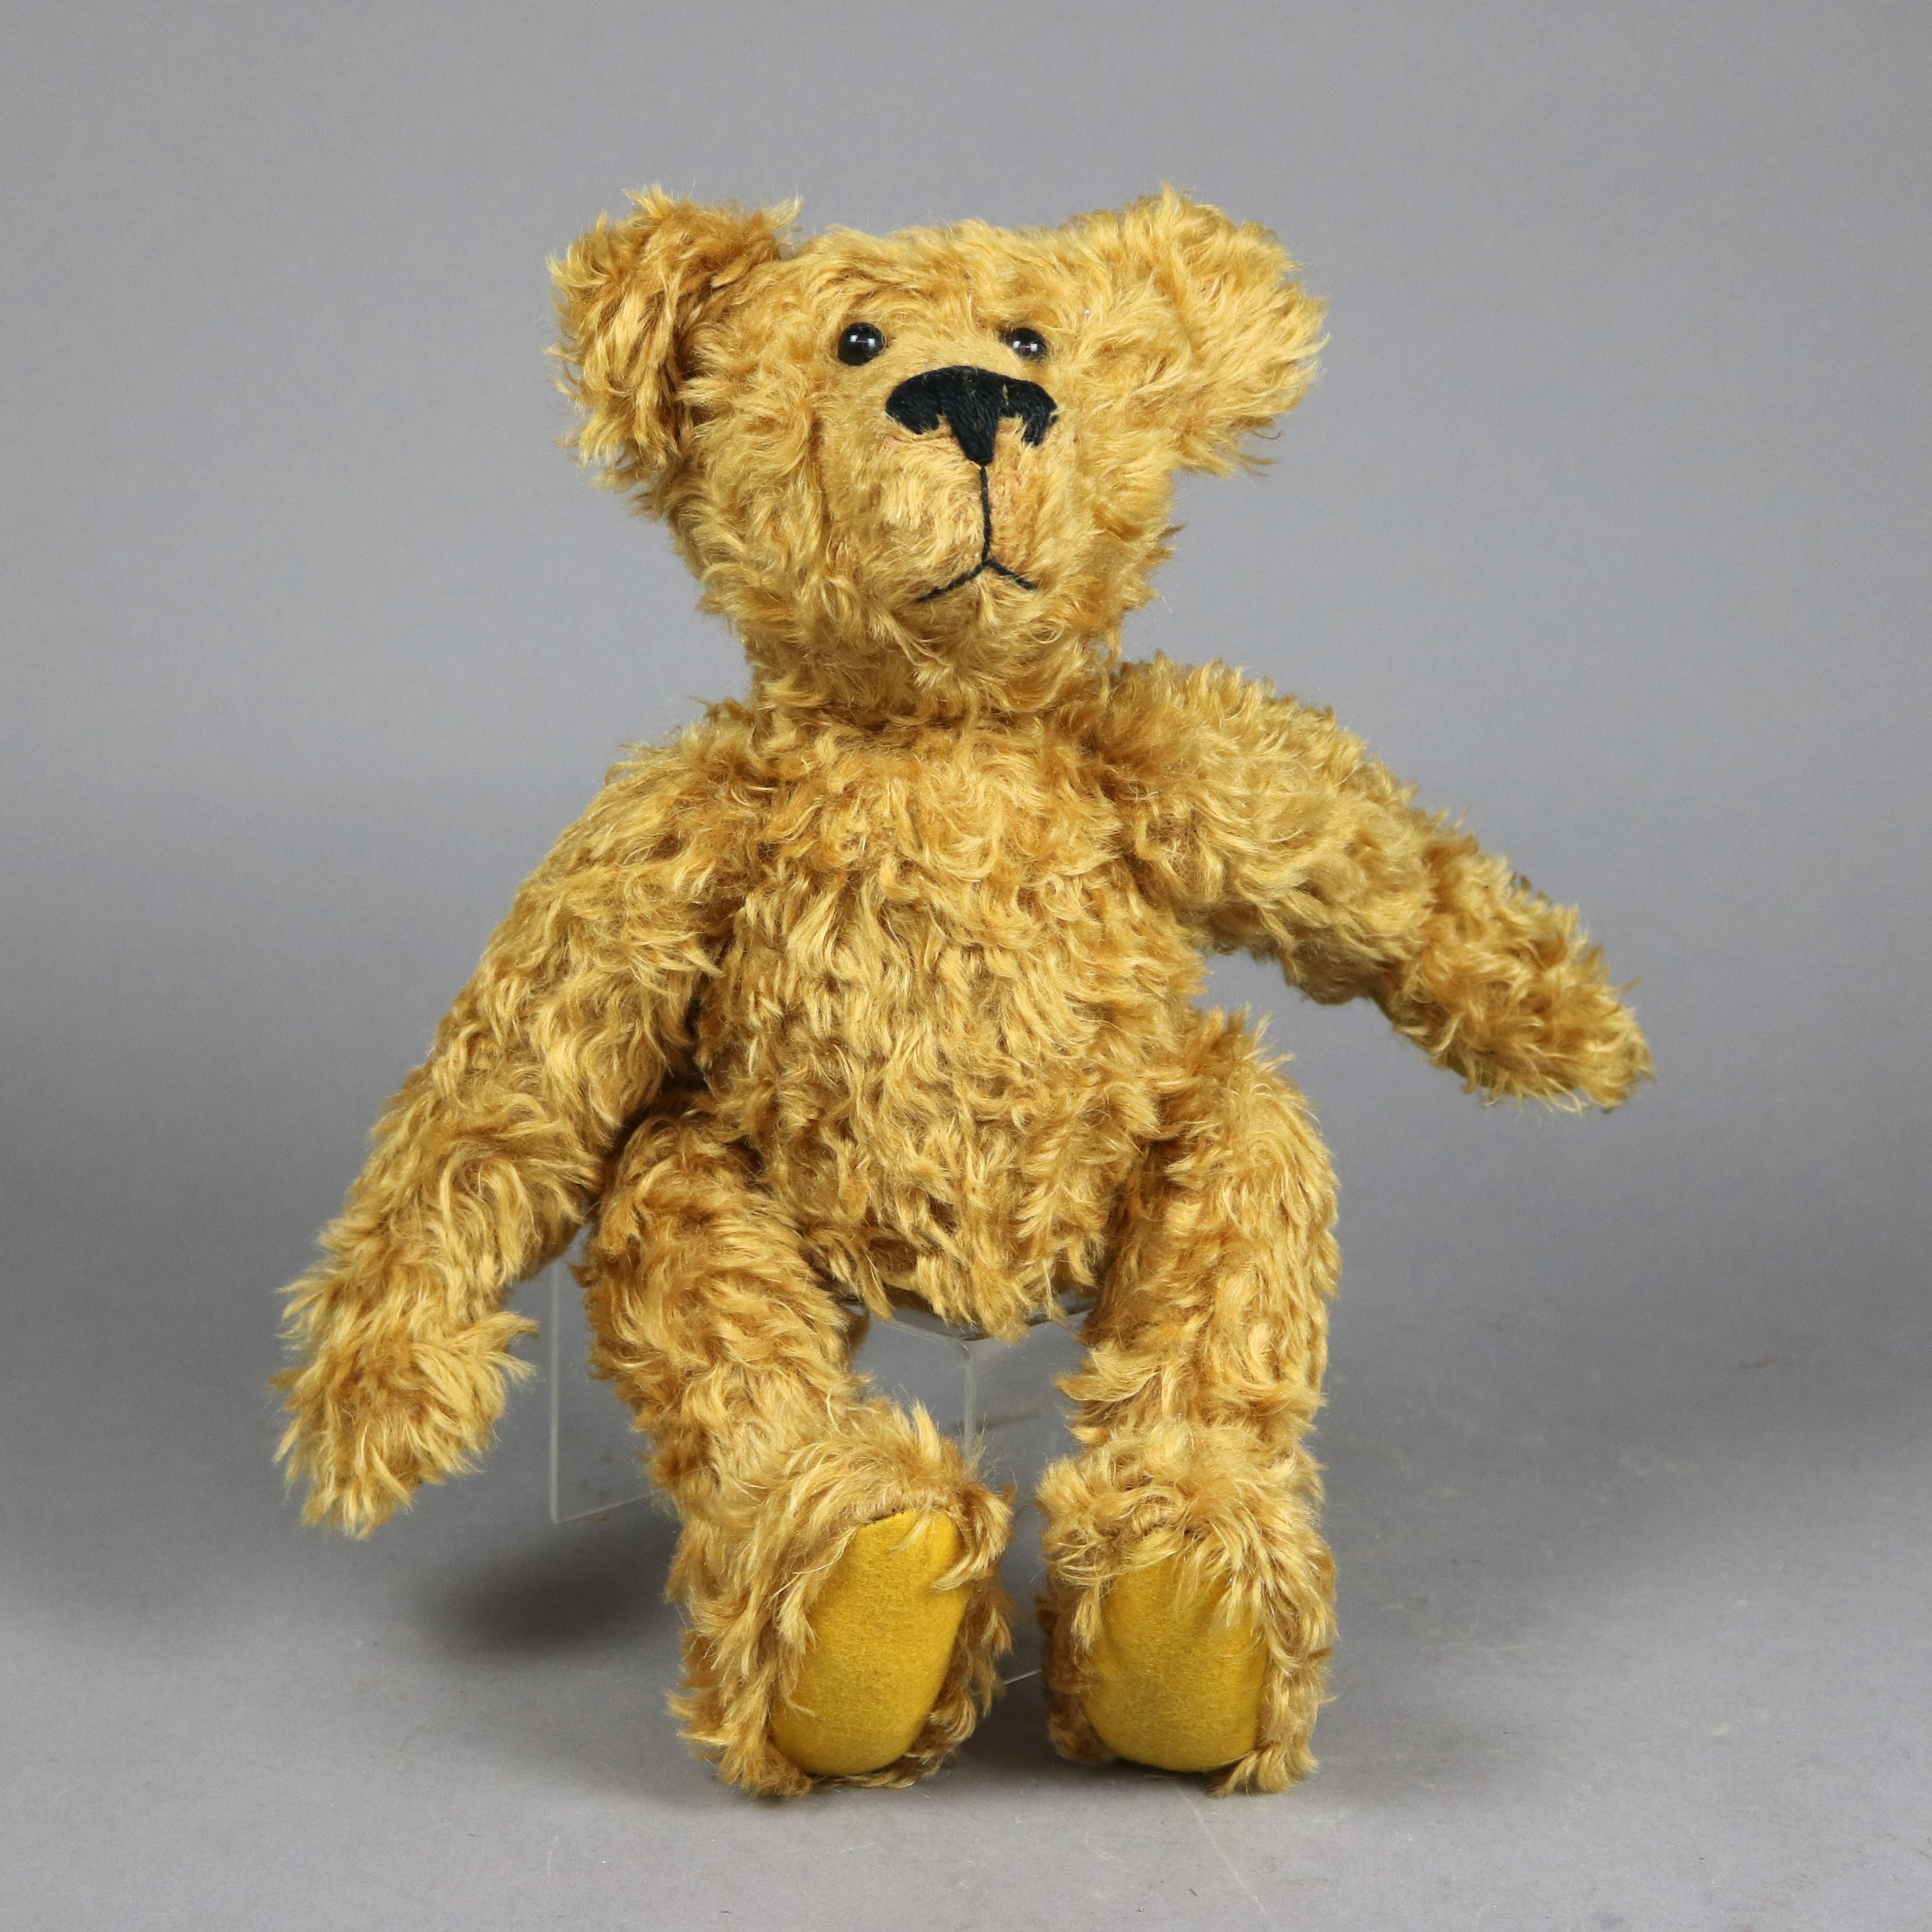 An antique Teddy bear in the manner of Steiff offers standard size with golden coat and jointed limbs, without label, c1940

Measures - 14.5''H x 13.5''W x 5''D.